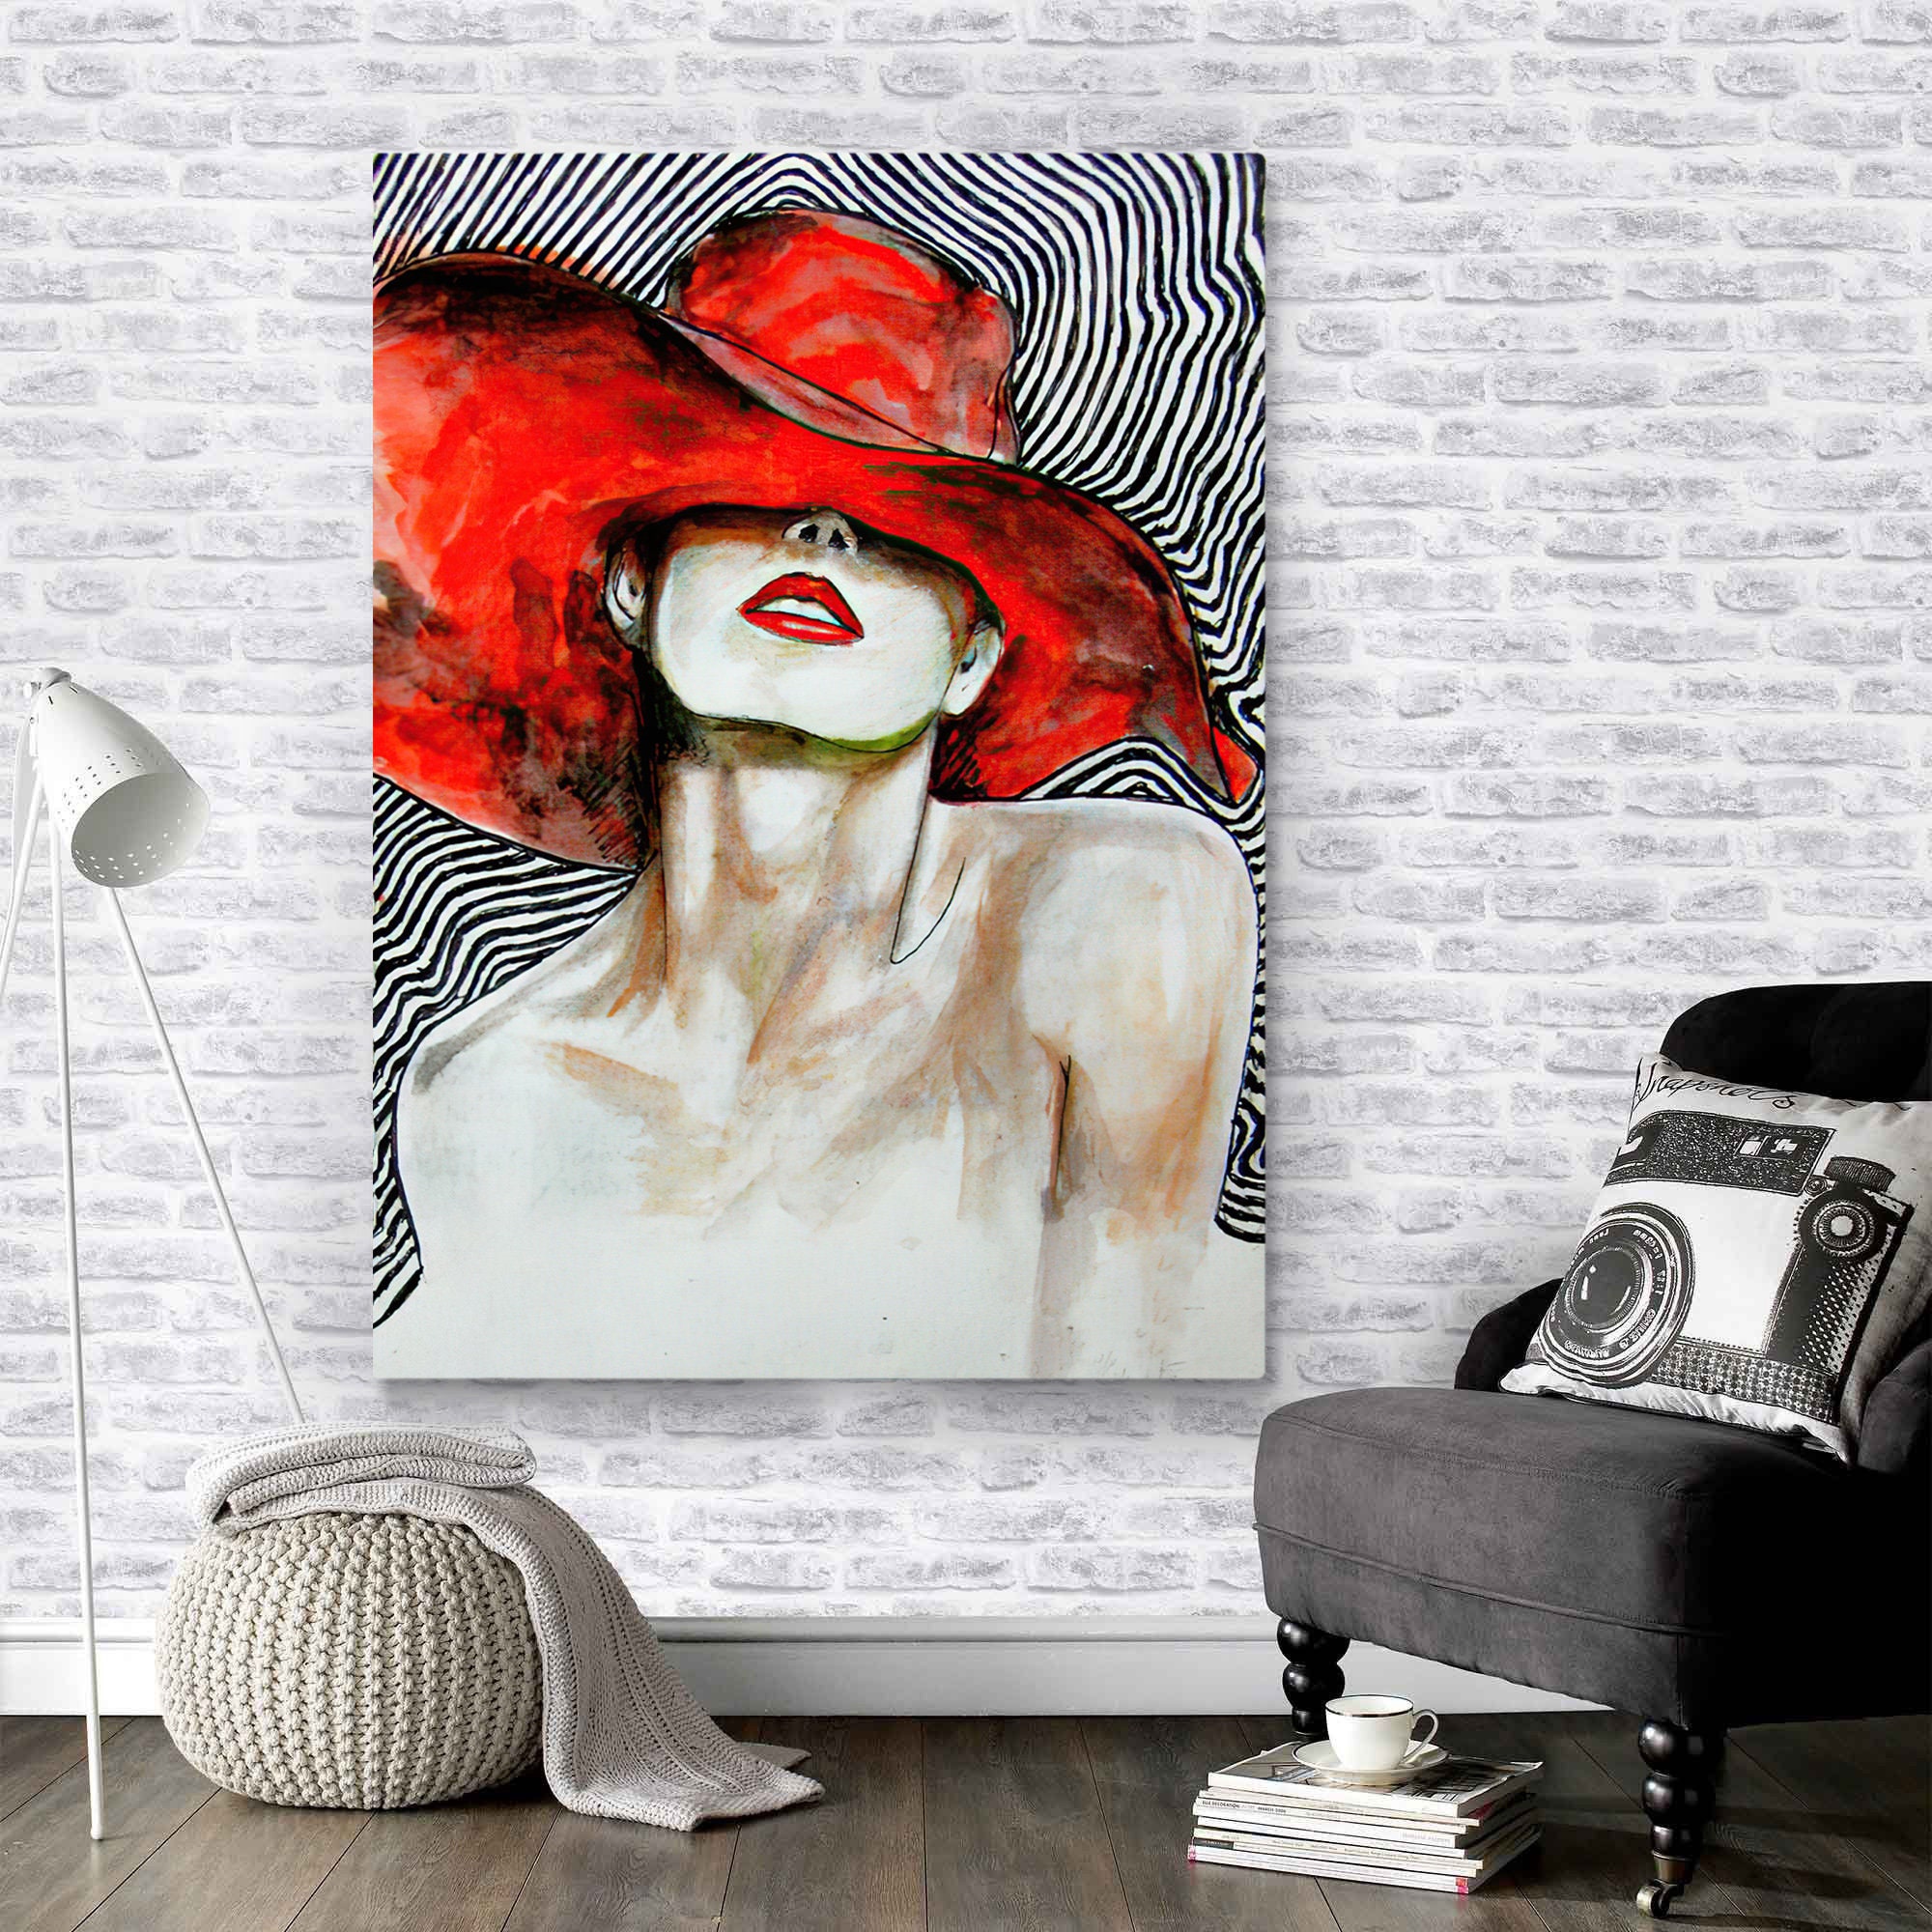 Woman Wall Female and Red Print, Art, Painting Portrait Art, Etsy Woman Hat Poster, Ladies Art, Art Girl Woman With Art, Israel Canvas, Black - the Woman